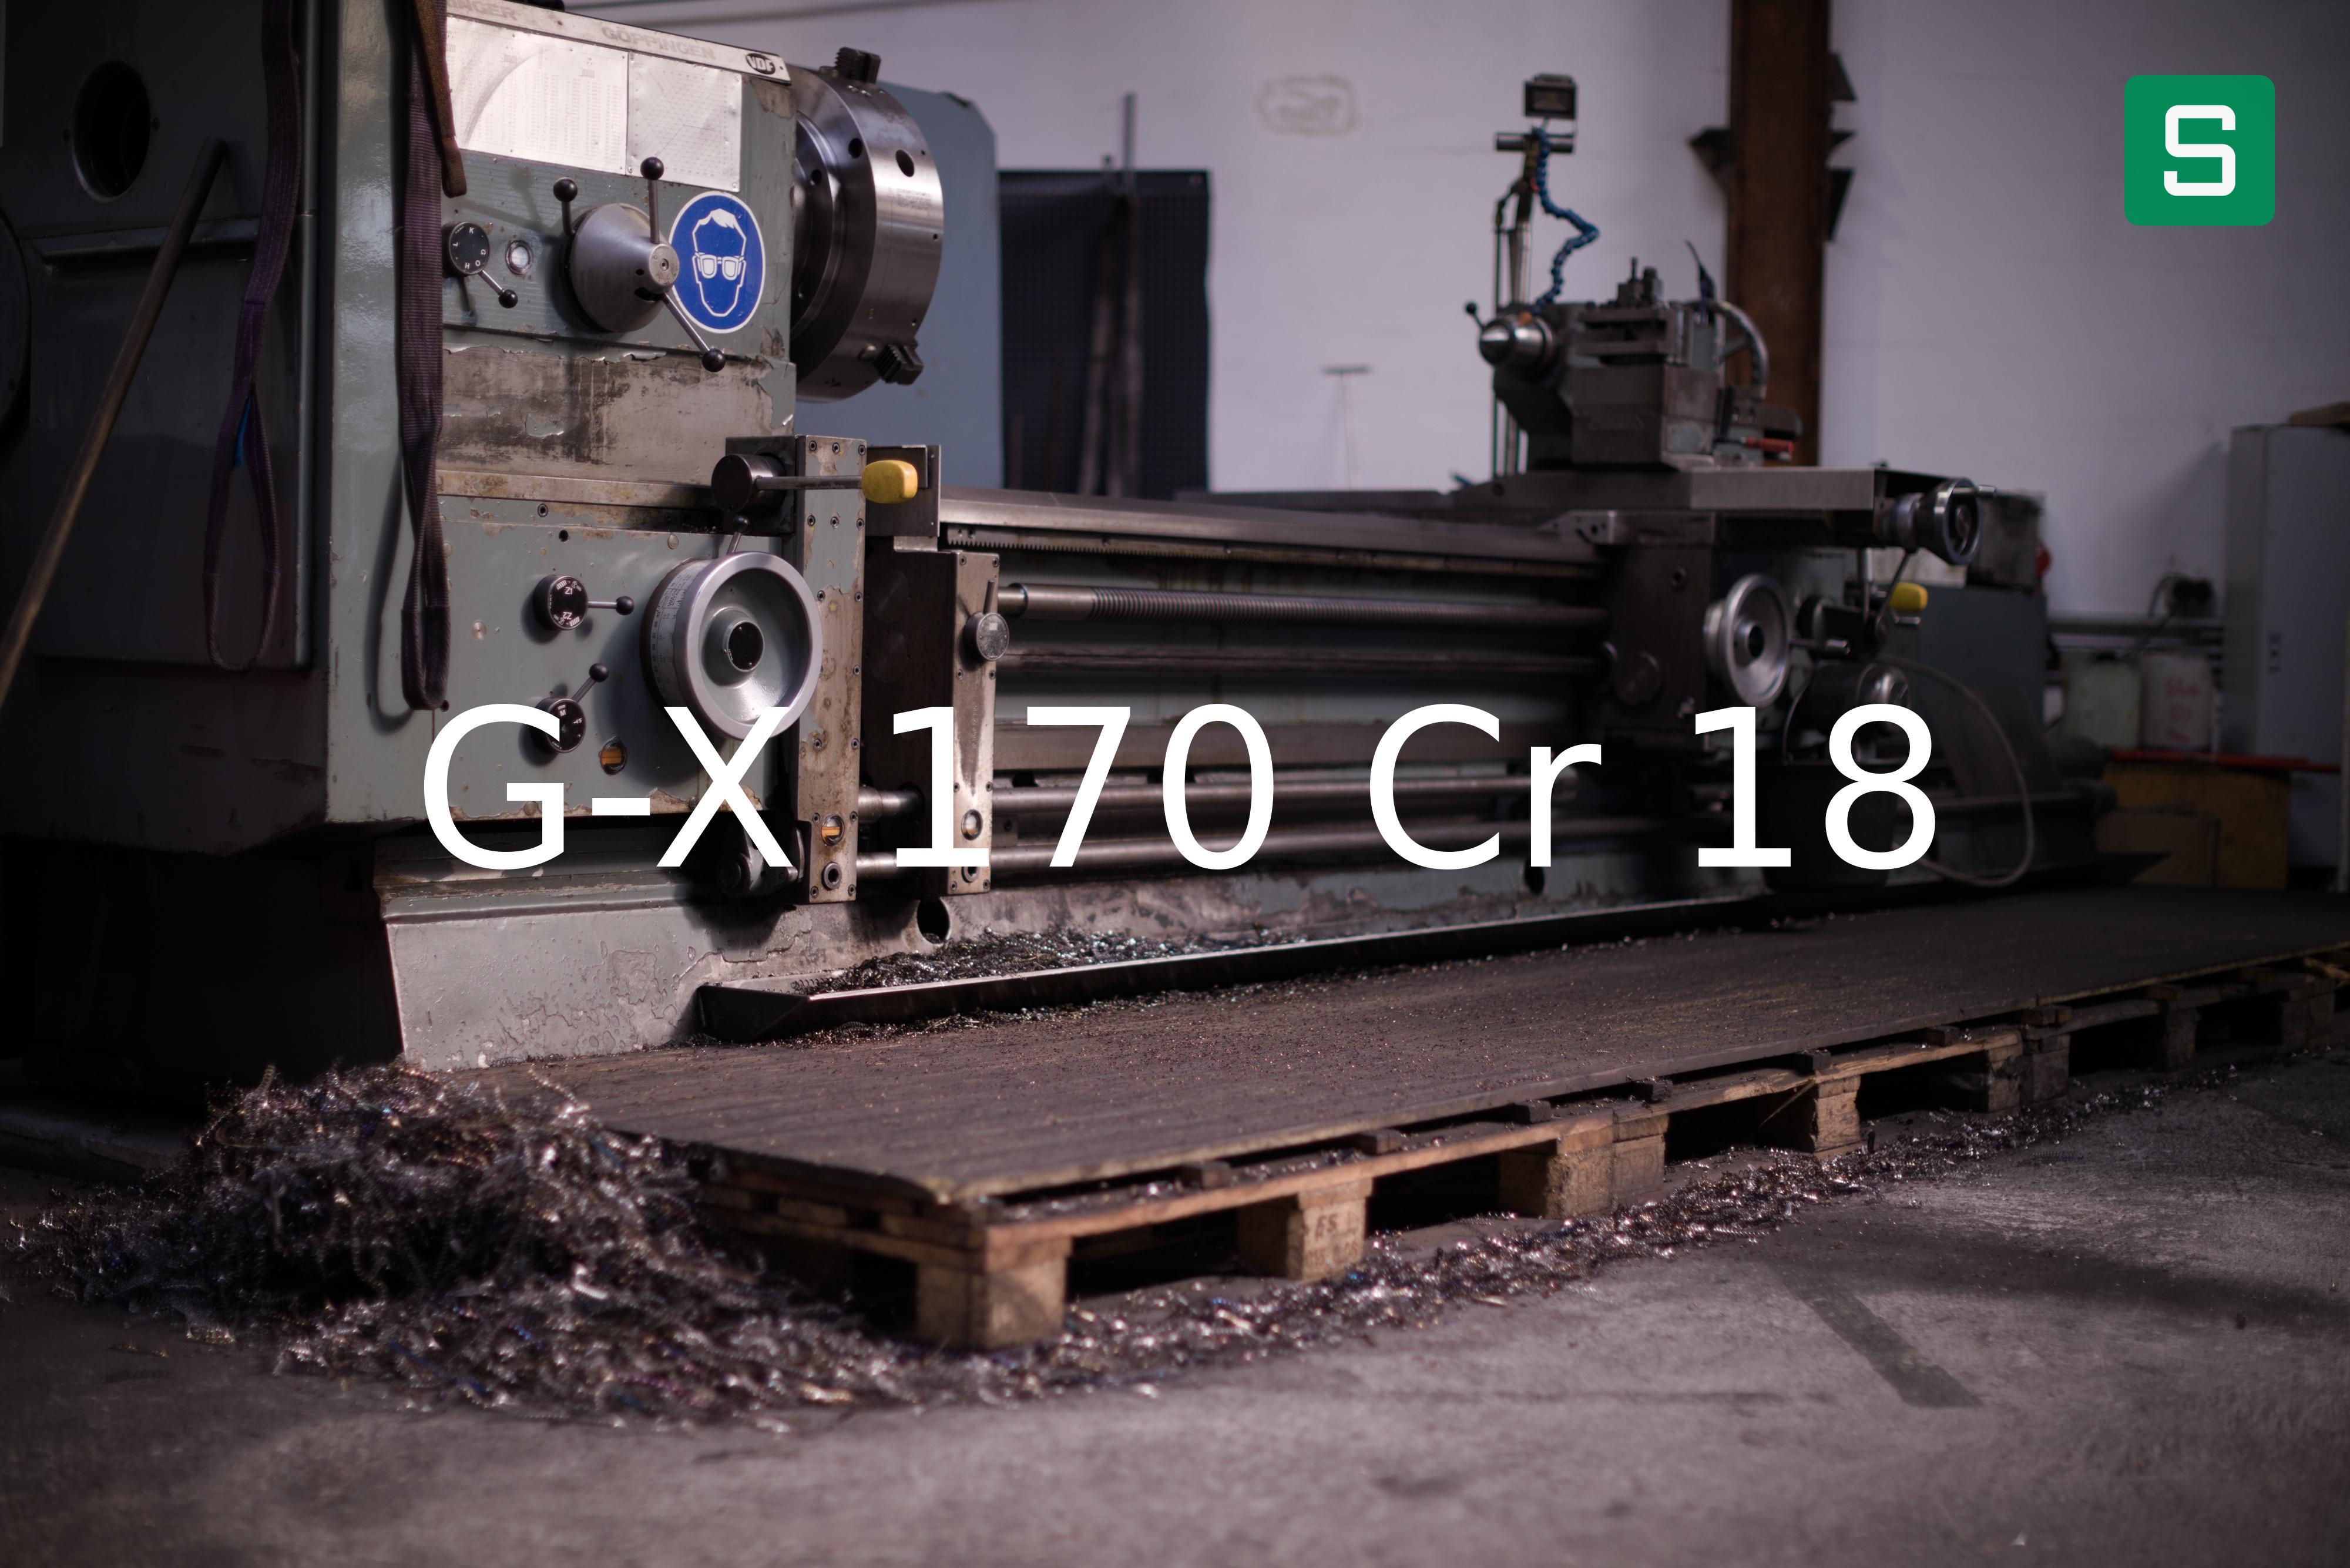 Steel Material: G-X 170 Cr 18